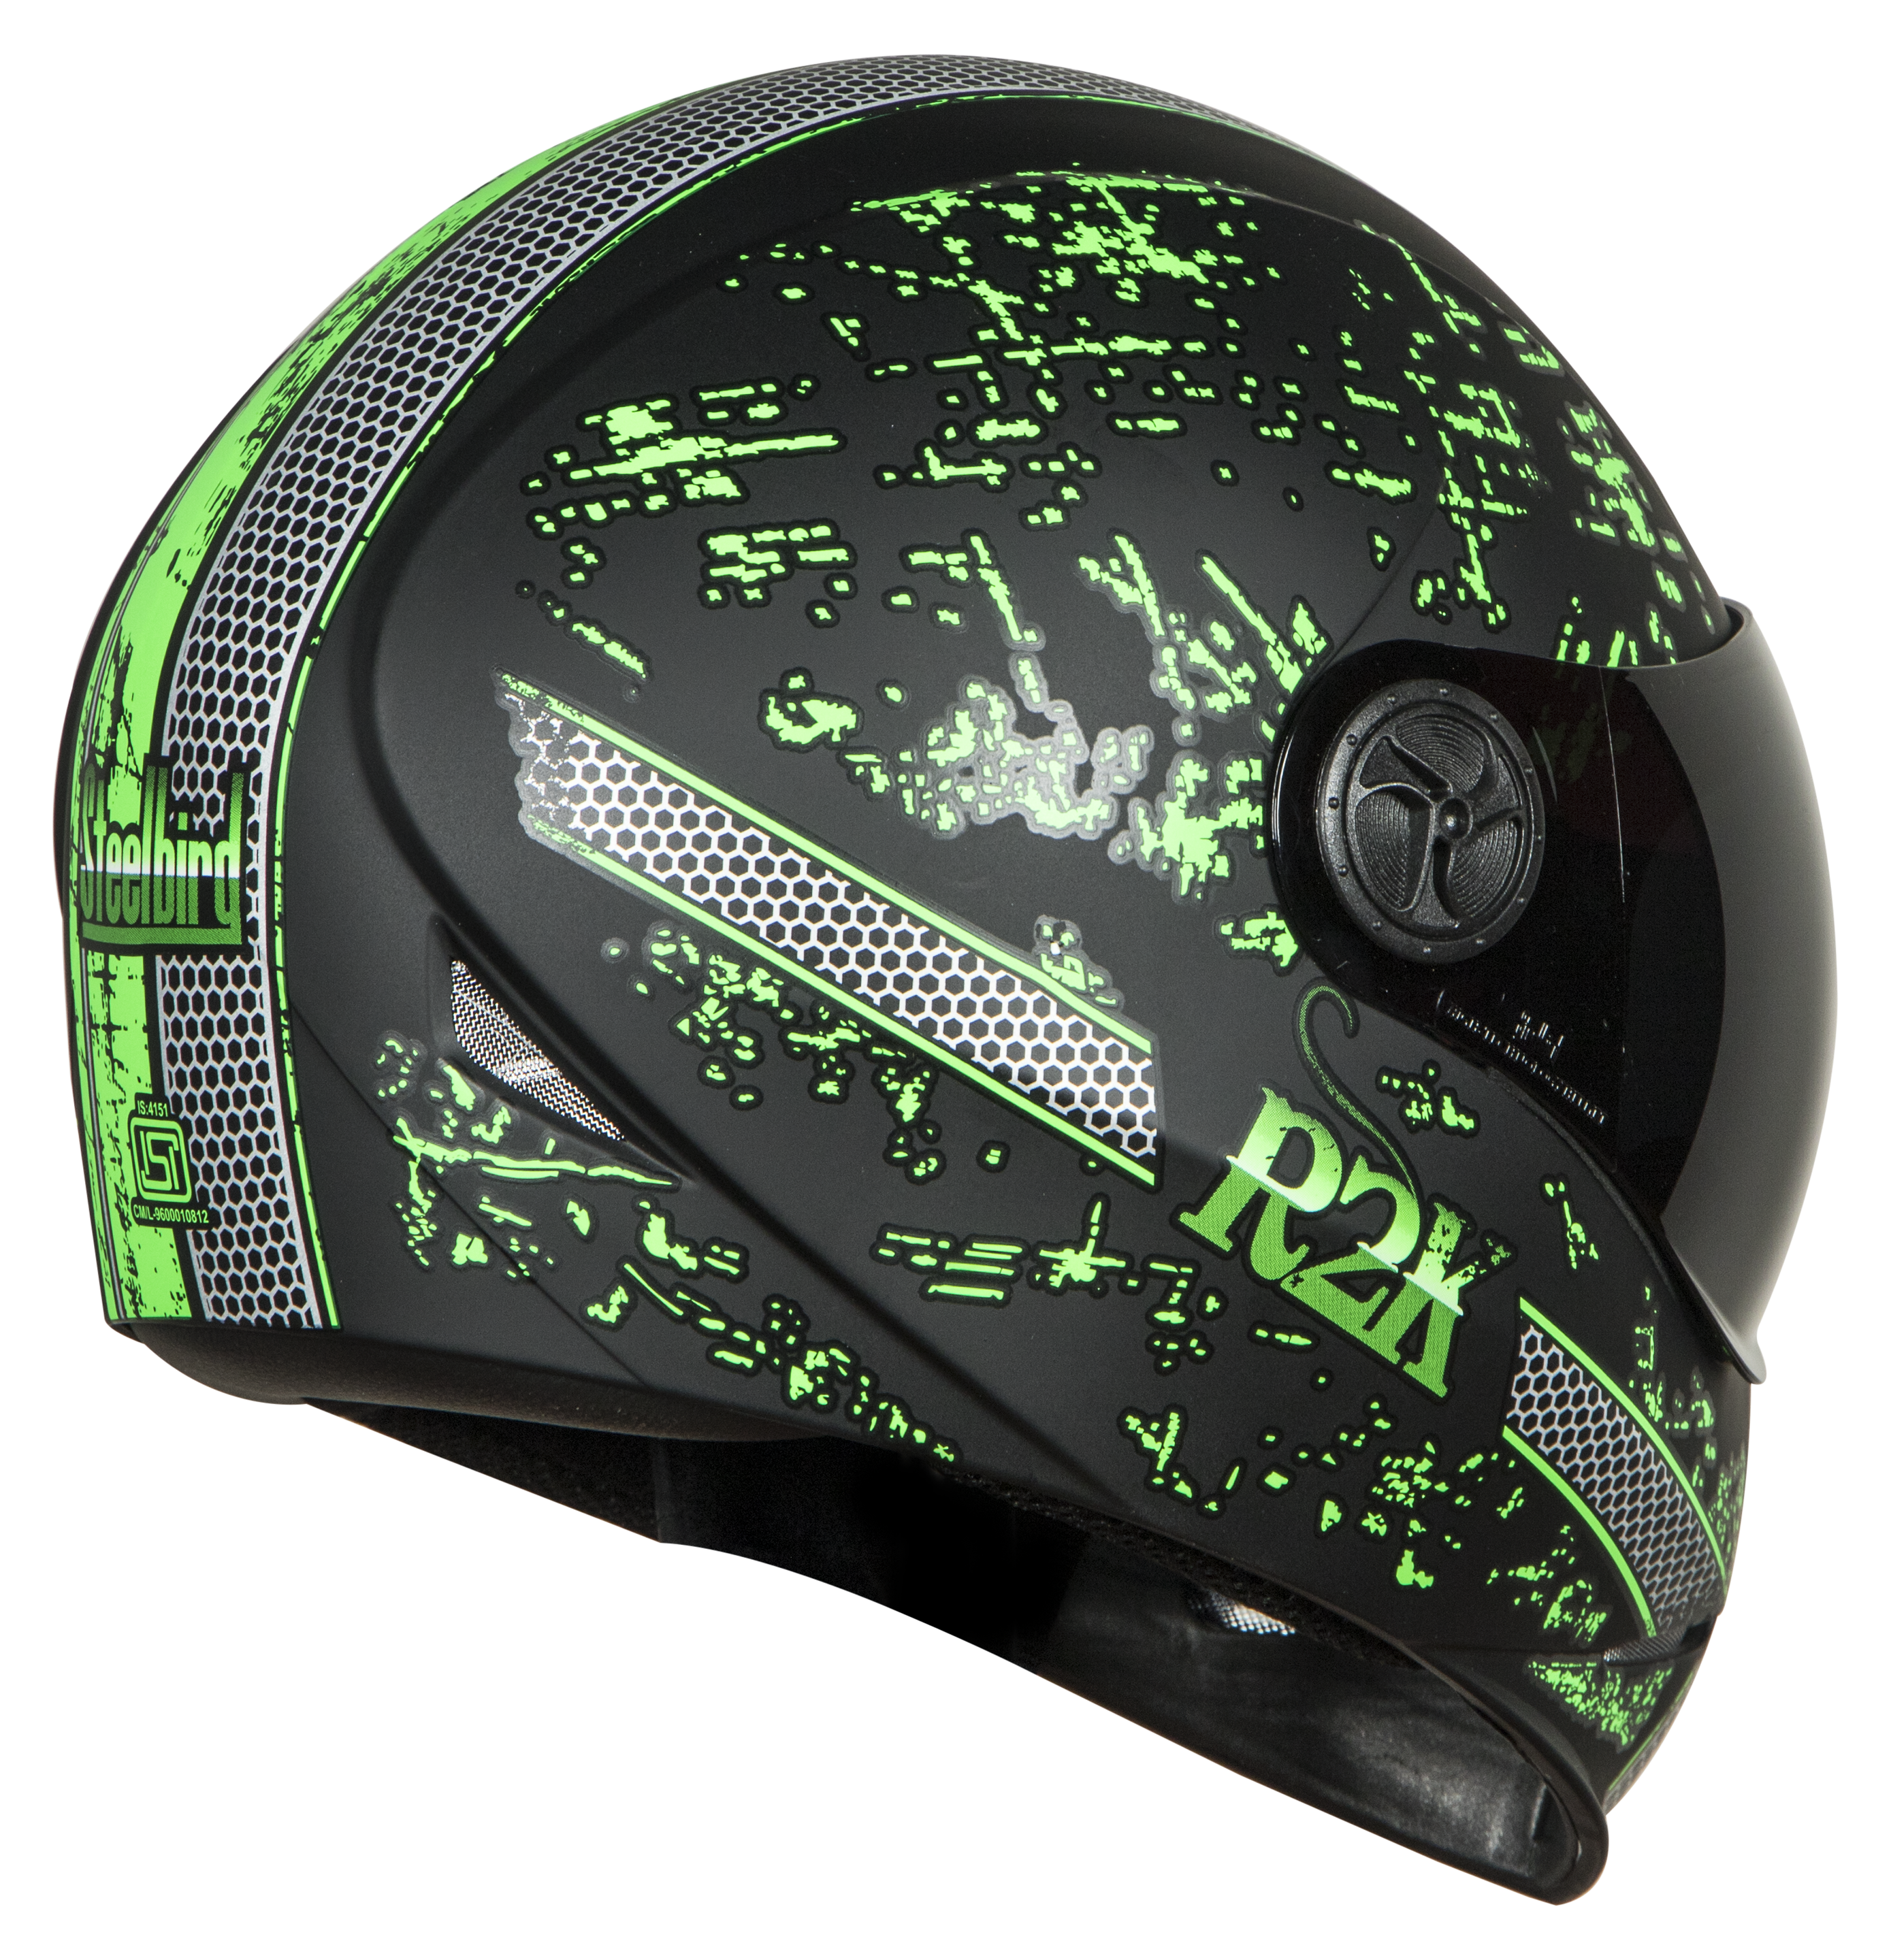 SBH-1 Adonis R2K Mat Black With Green( Fitted With Clear Visor Extra Smoke Visor Free)